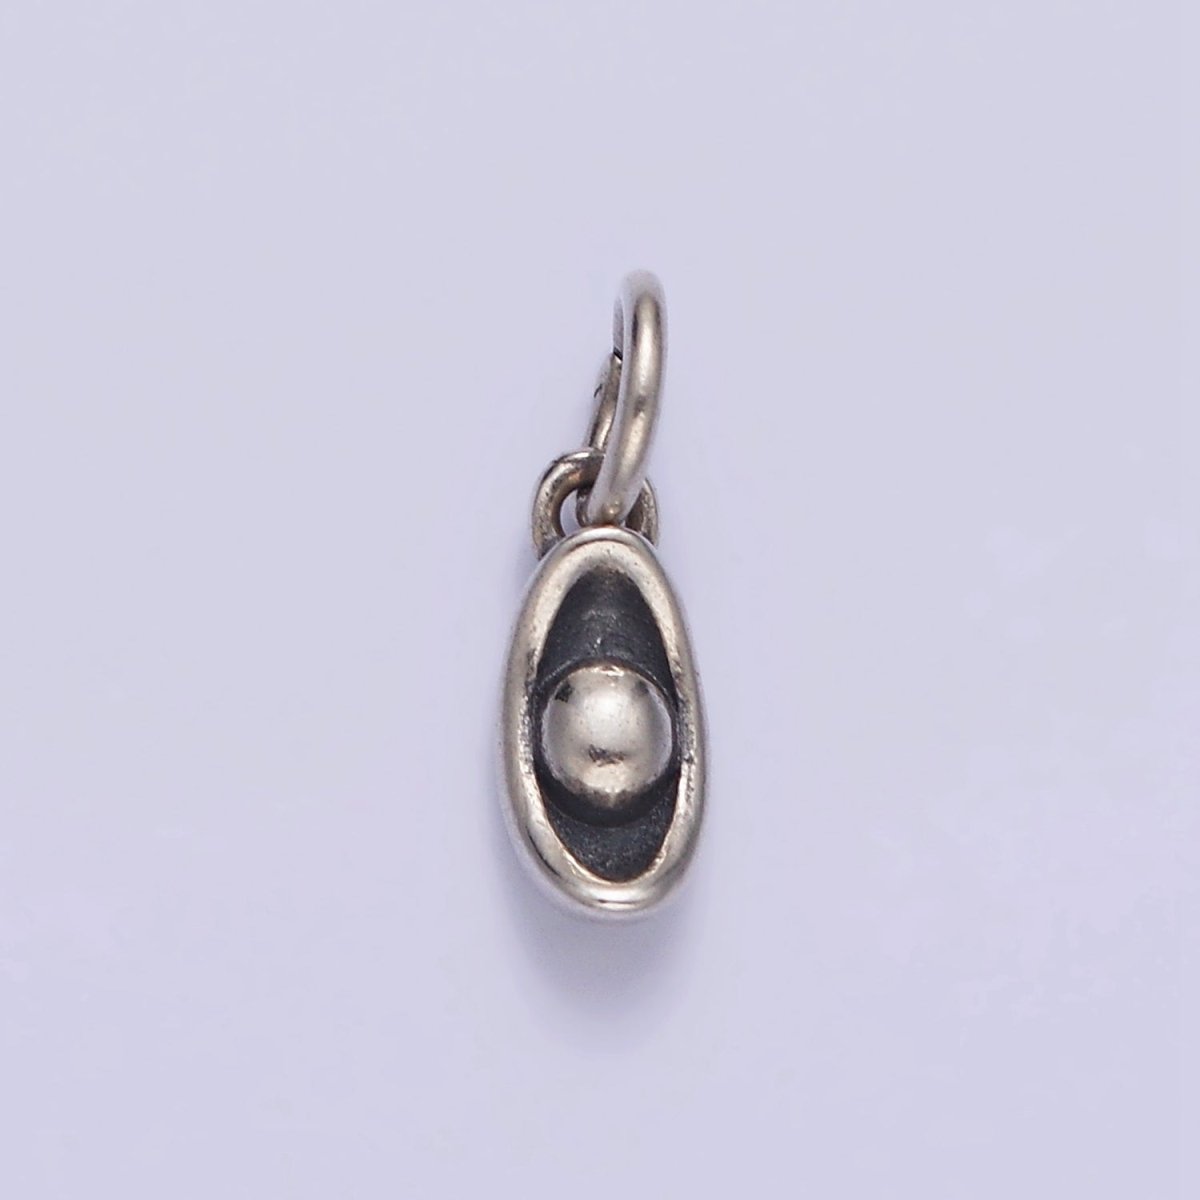 S925 Sterling Silver 14mm Pea Plant Nature Add-On Charm | SL-378 - DLUXCA